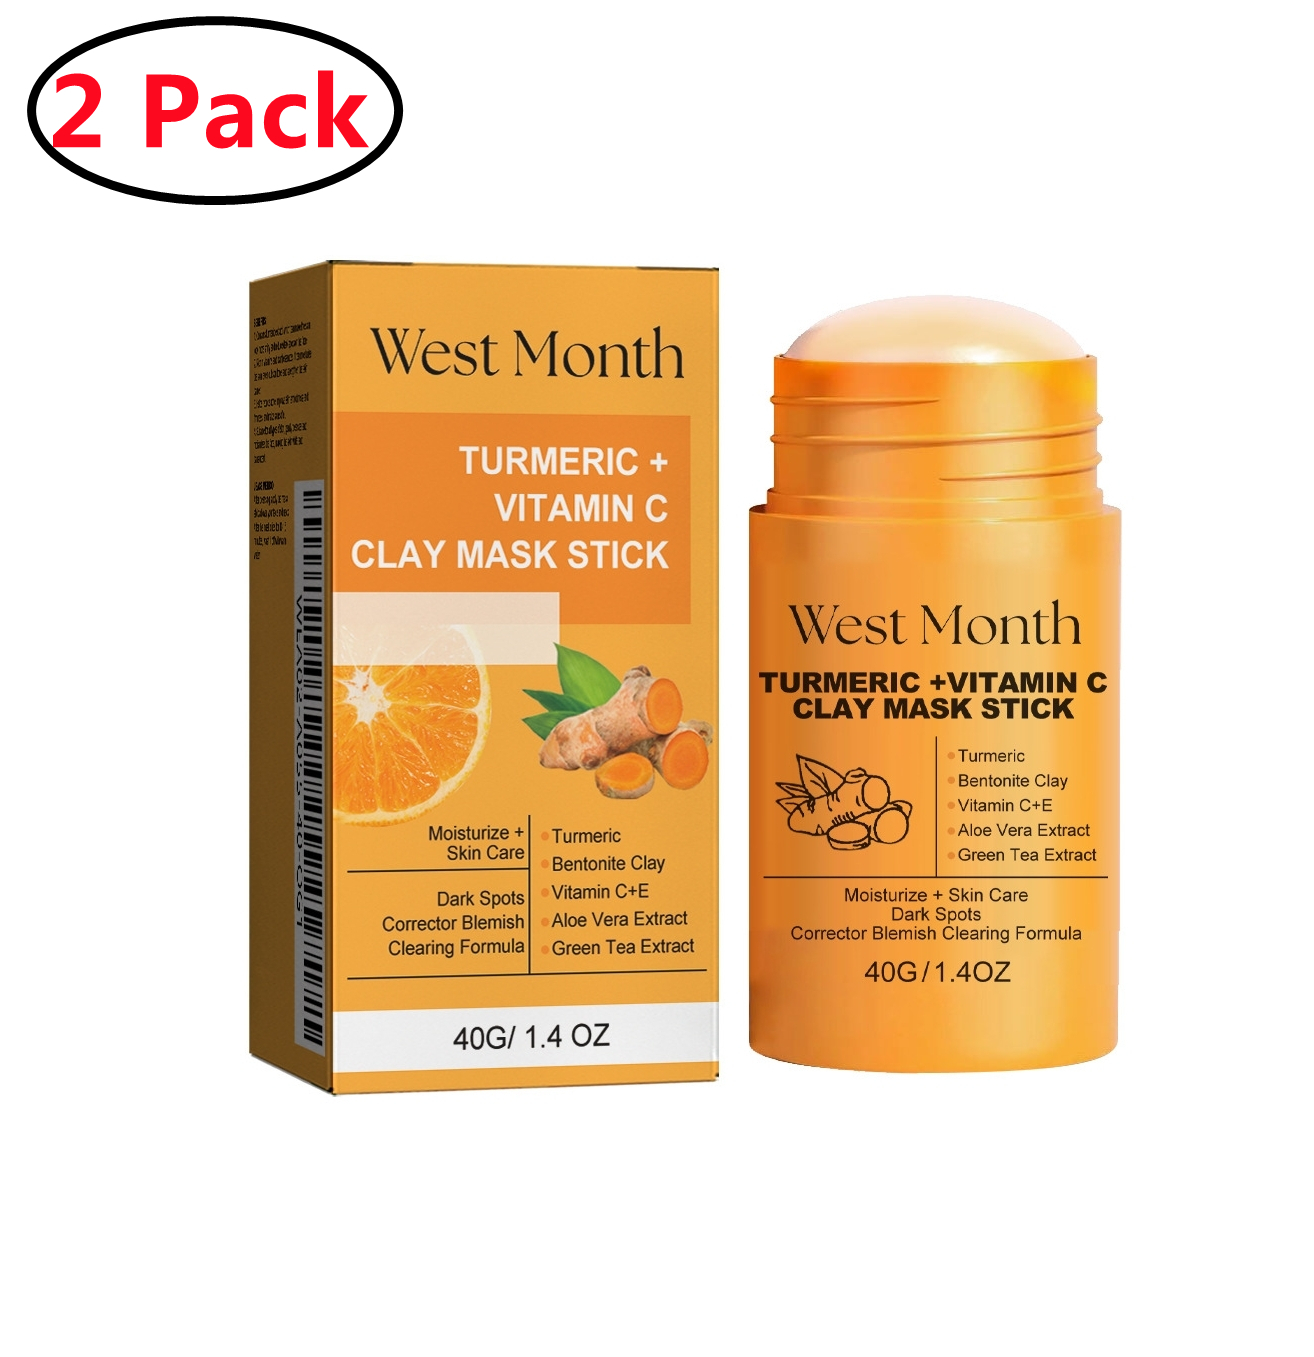 2 Pack Turmeric Clay Stick Mask, Organic, Vitamin C Purifying Mask for ...